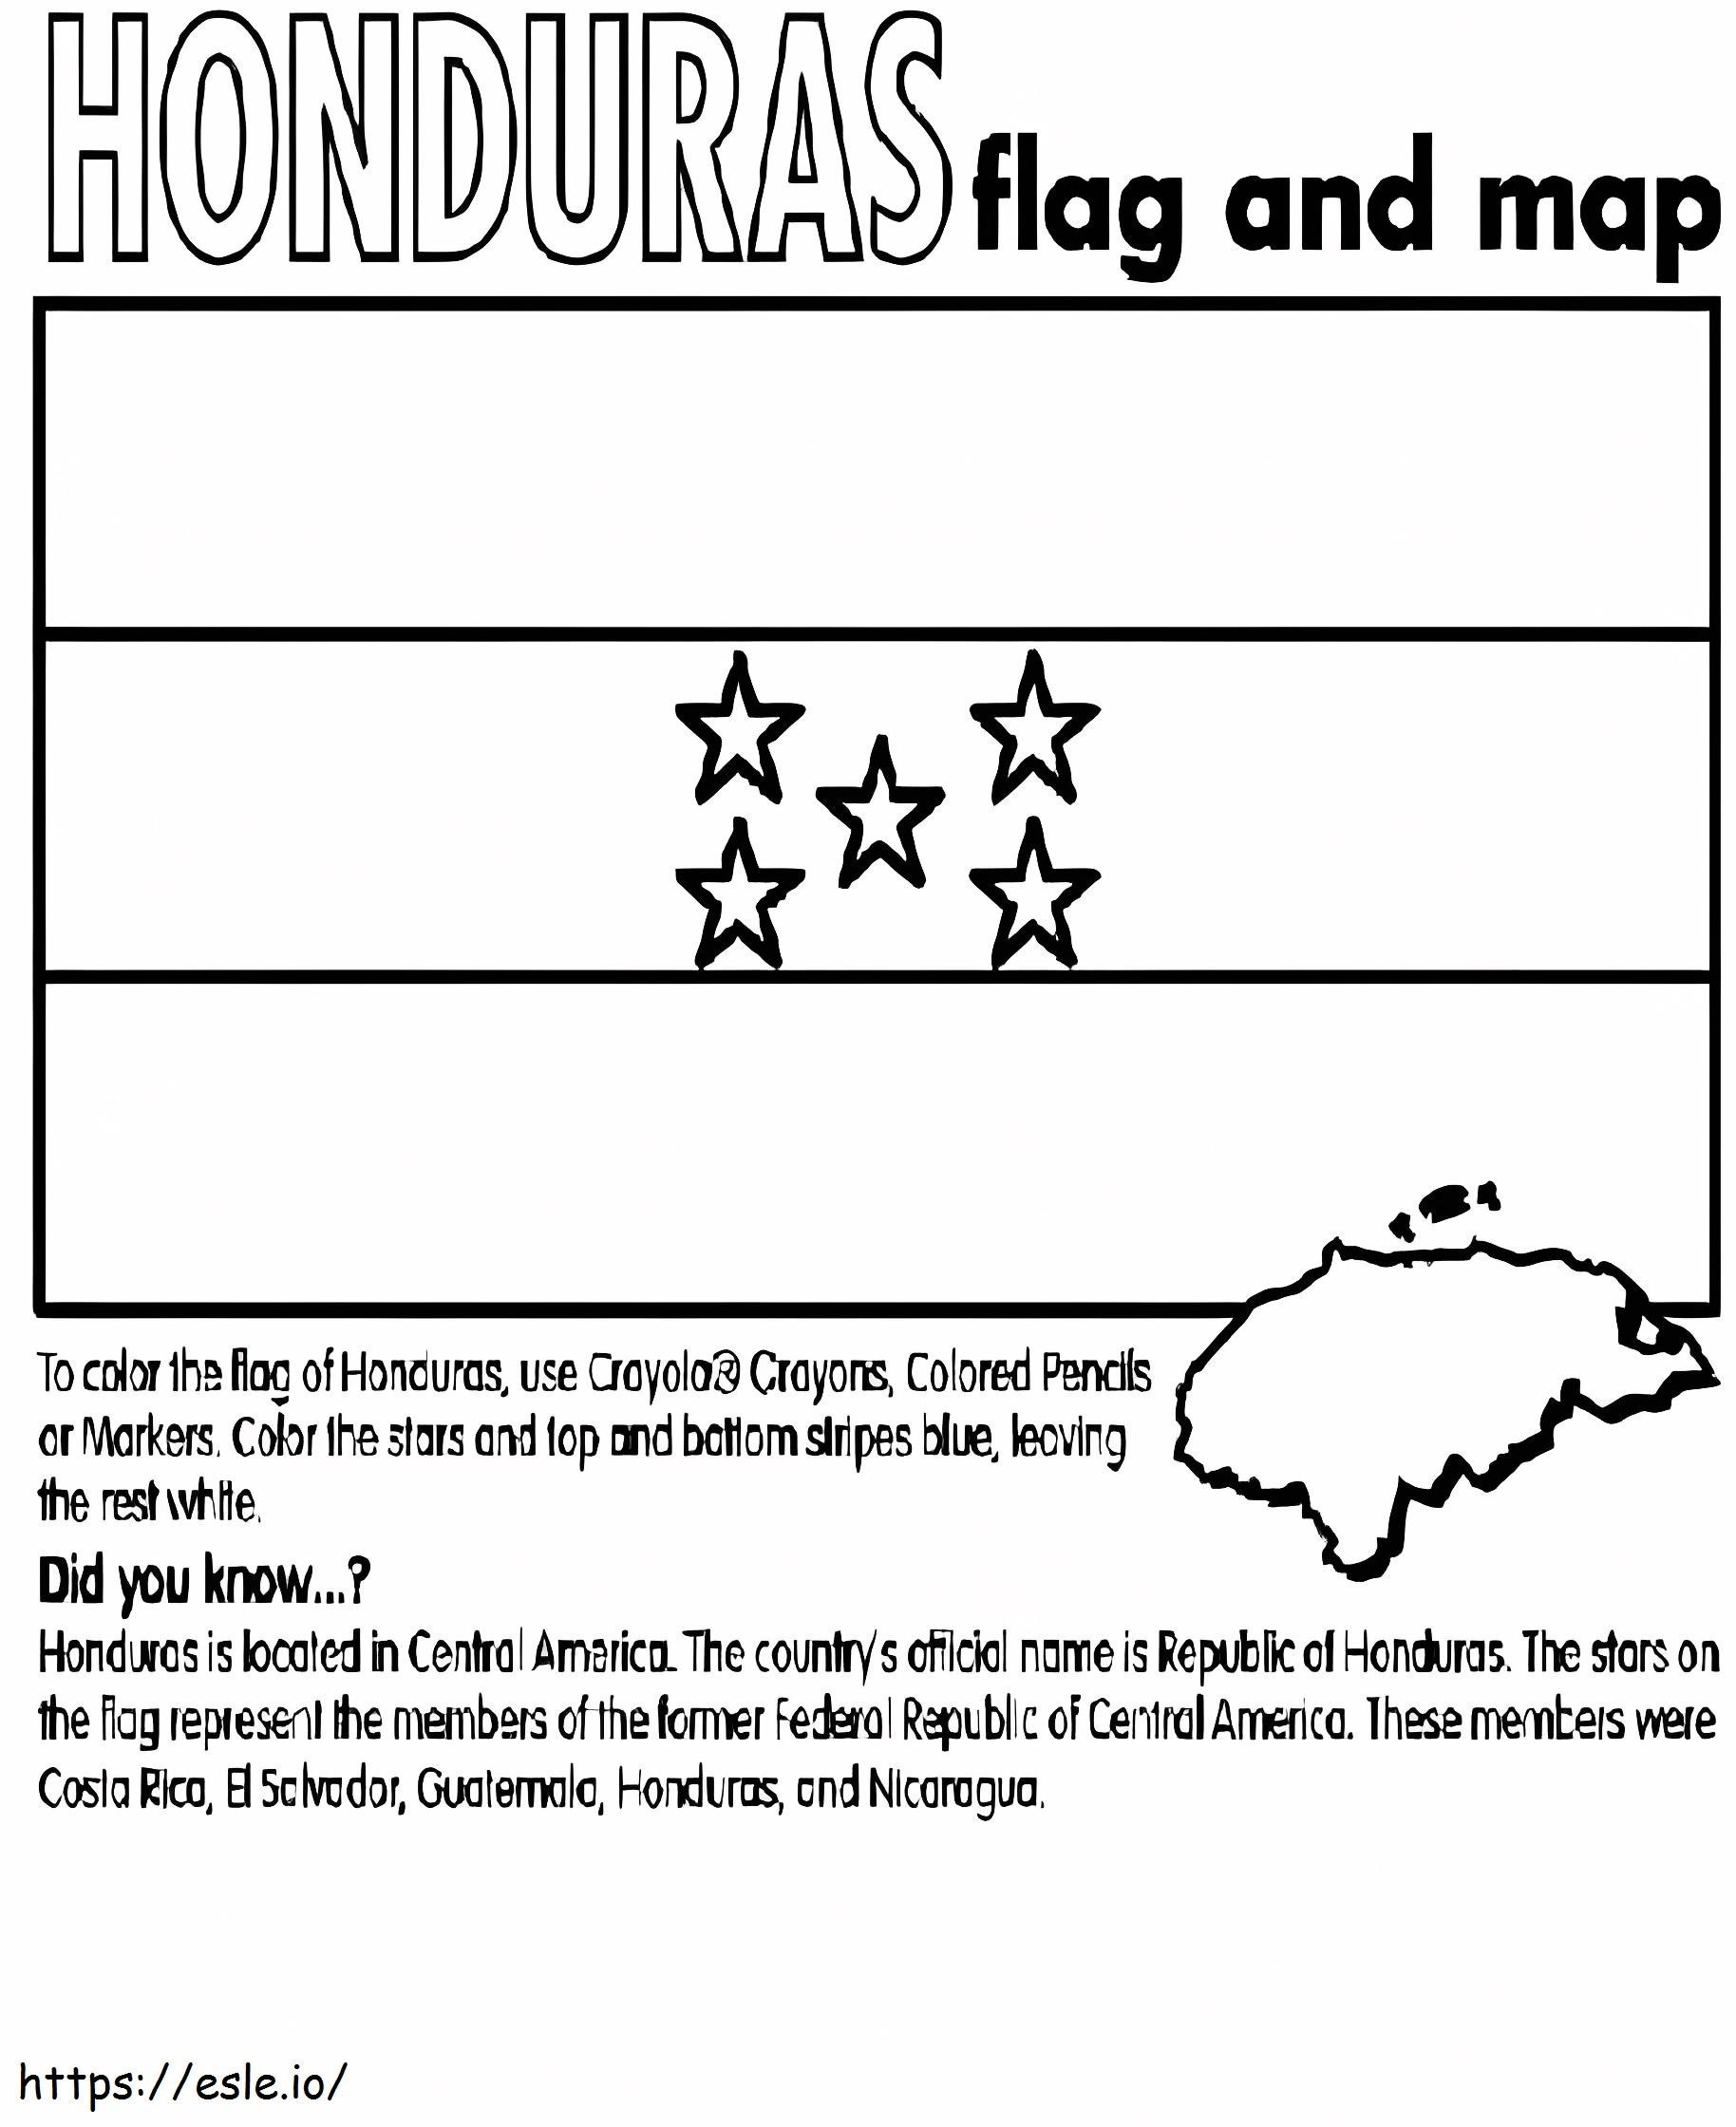 Honduras Flag And Map coloring page